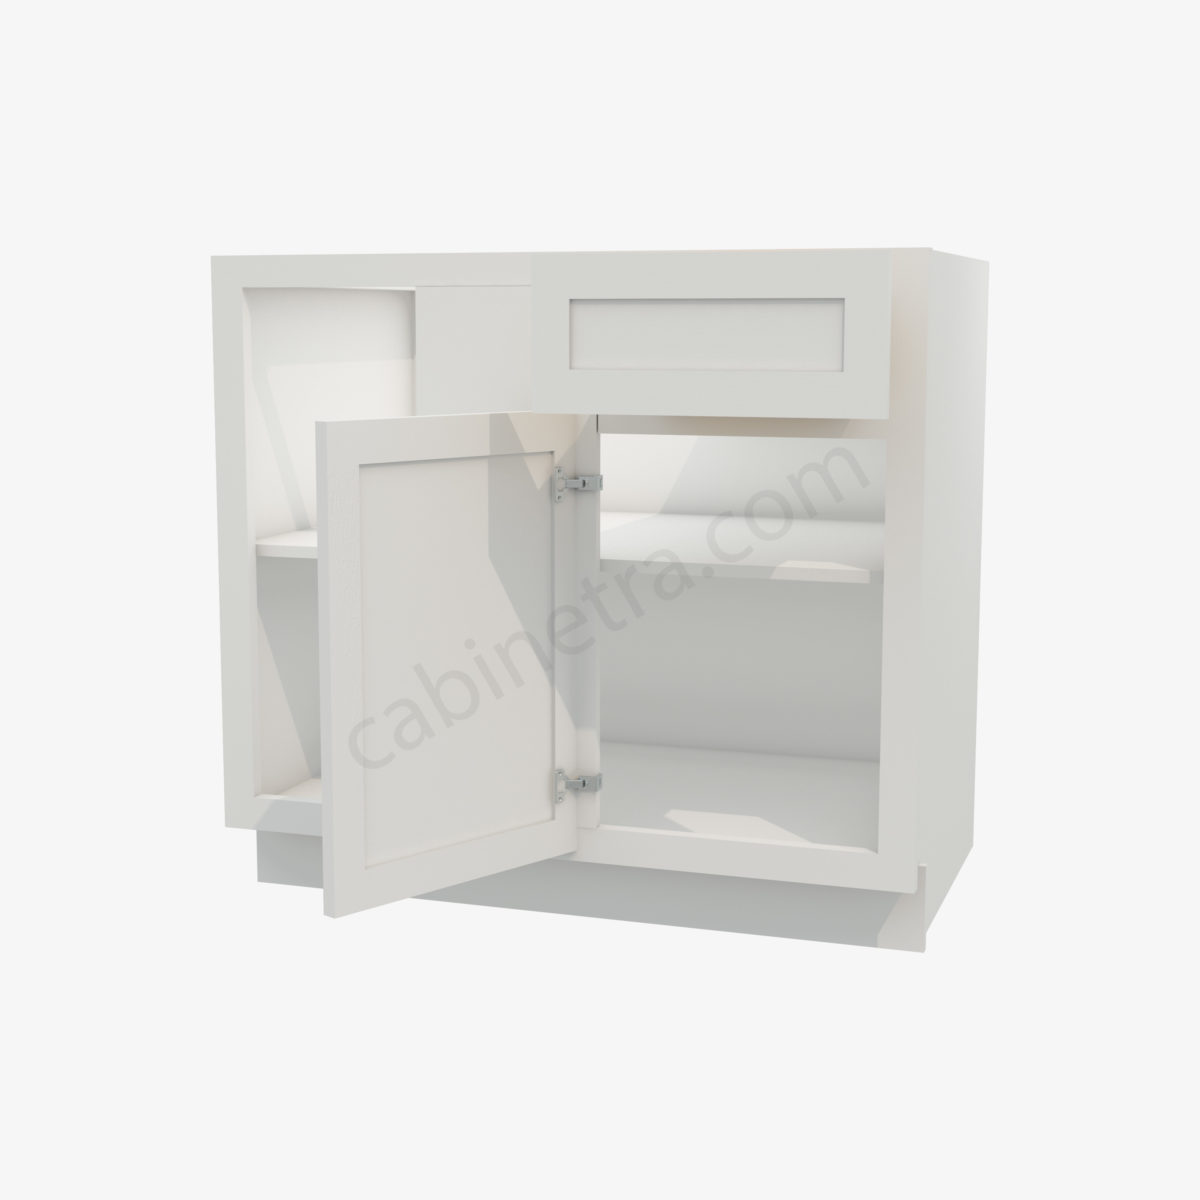 AW BBLC39 42 36W 5 Forevermark Ice White Shaker Cabinetra scaled